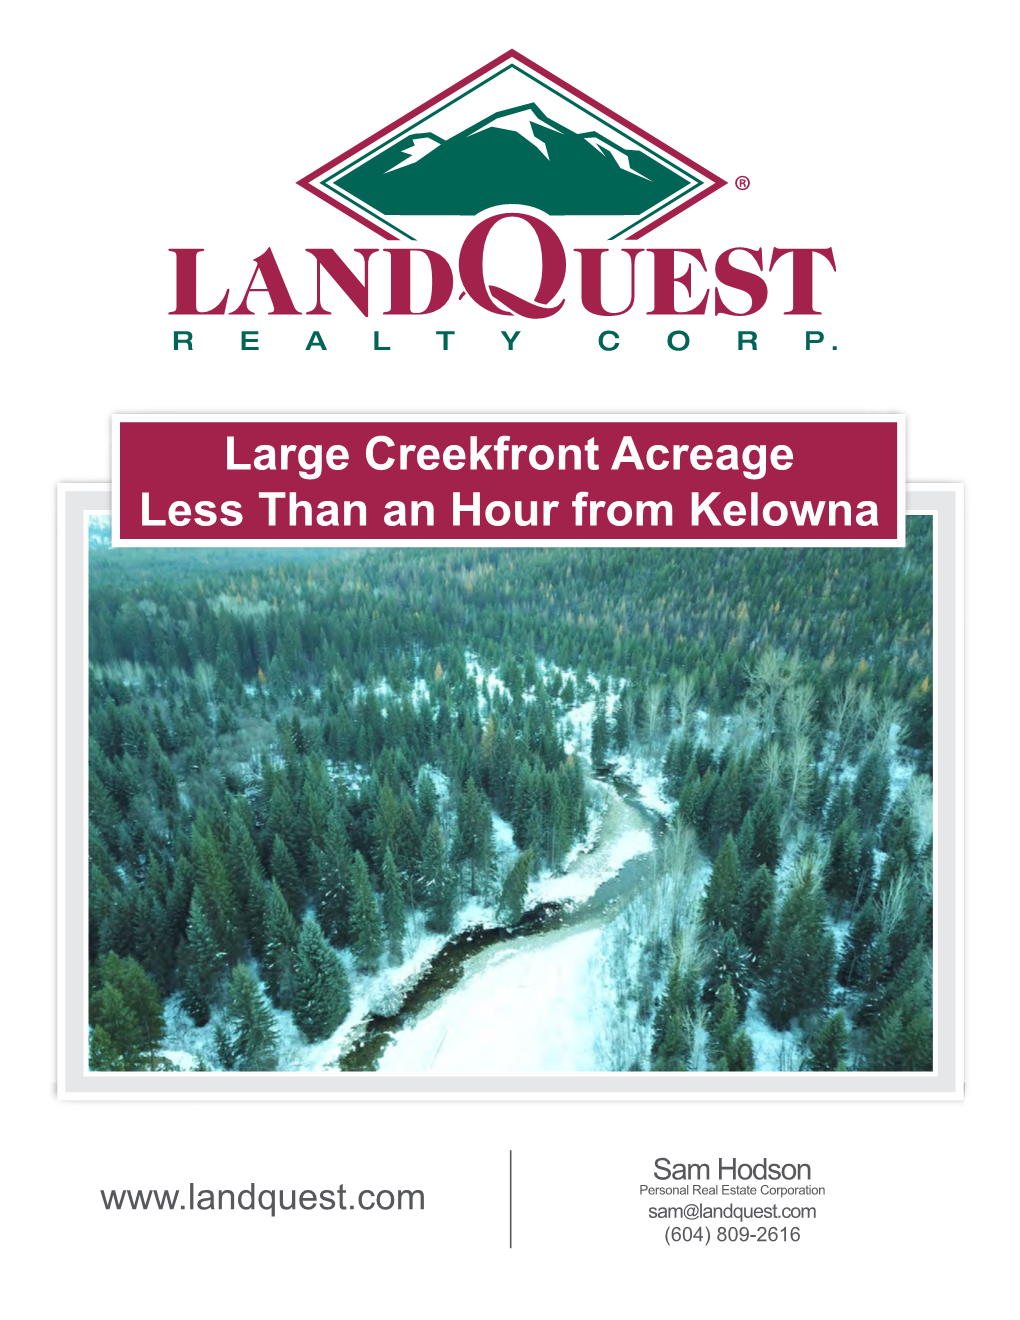 Large Creekfront Acreage Less Than an Hour from Kelowna